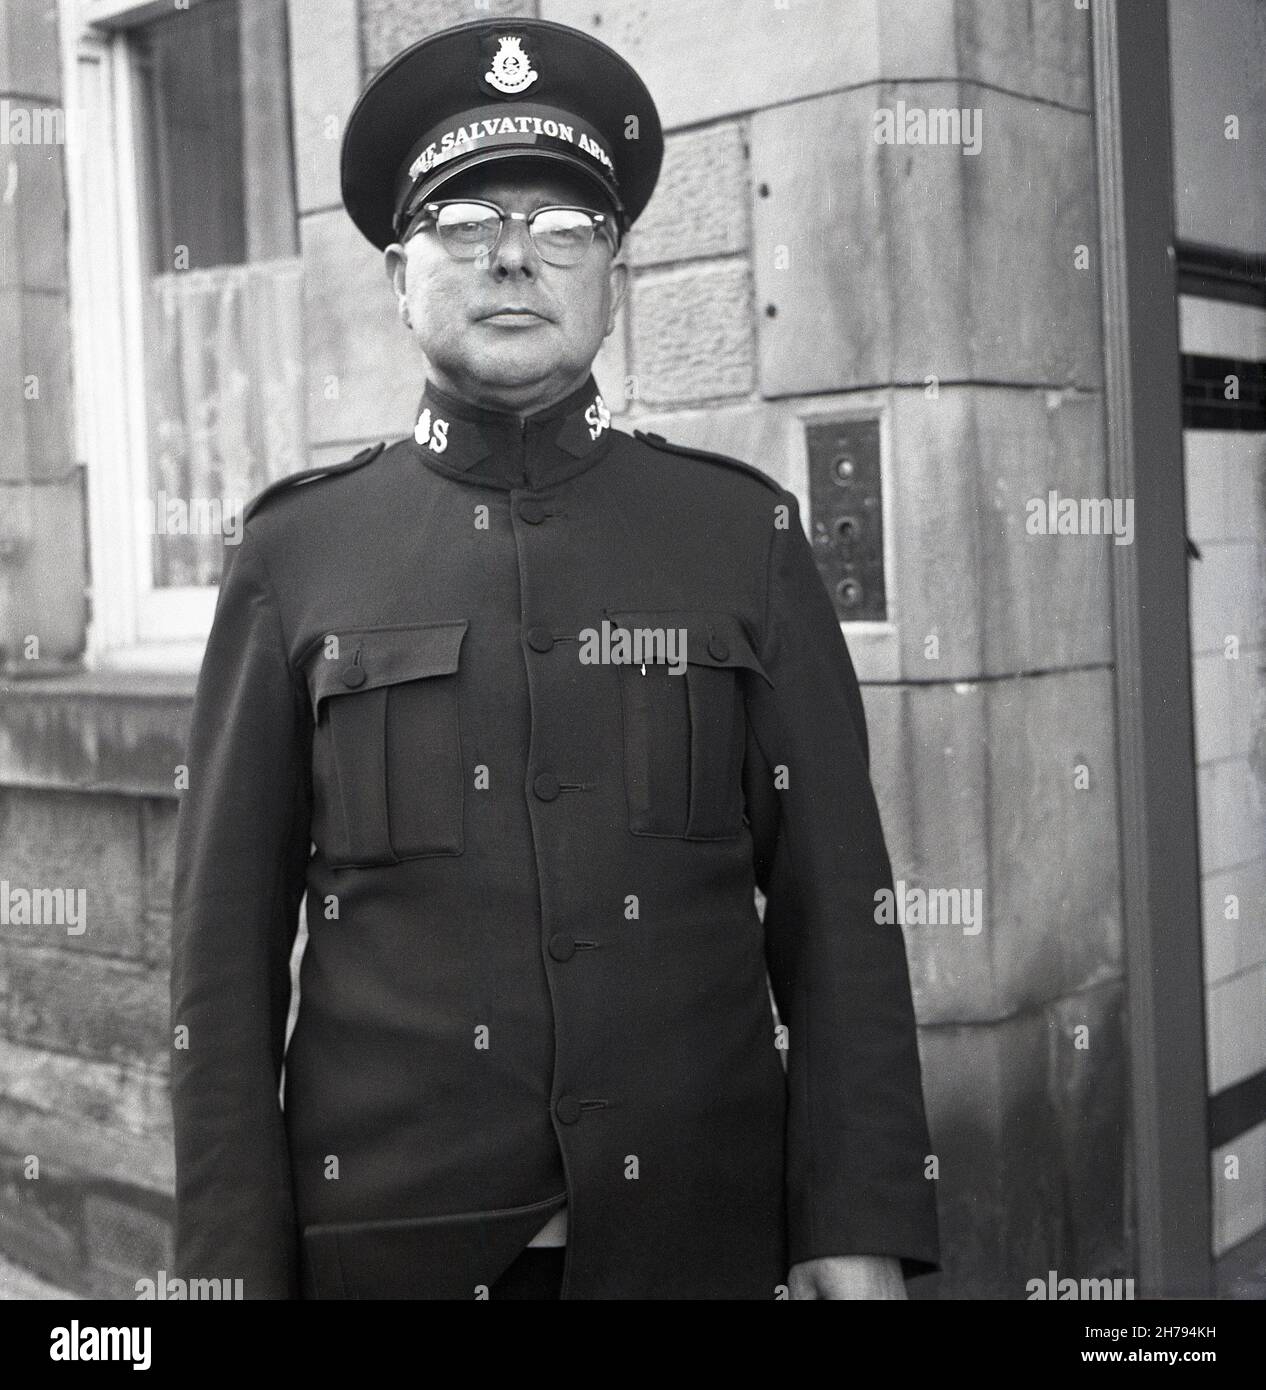 1965, outside a building, a soldier of The Salvation Army in his uniform and hat proudly standing upright for his photo, Fife Scotland, UK. Soldiers of The Salvation Army are Christians who have undertaken a specific convenant or promise regarding lifestyle and beliefs and wear the uniform as a visible sign of their faith. Officers, Soldiers and Adherents are known as Salvationists. Founded in London in 1865 by William Booth and wife, Catherine as a charity to bring 'Salvation' to the poor & destitute, Booth introduced the military structure in 1878, which continued as a matter of tradition. Stock Photo